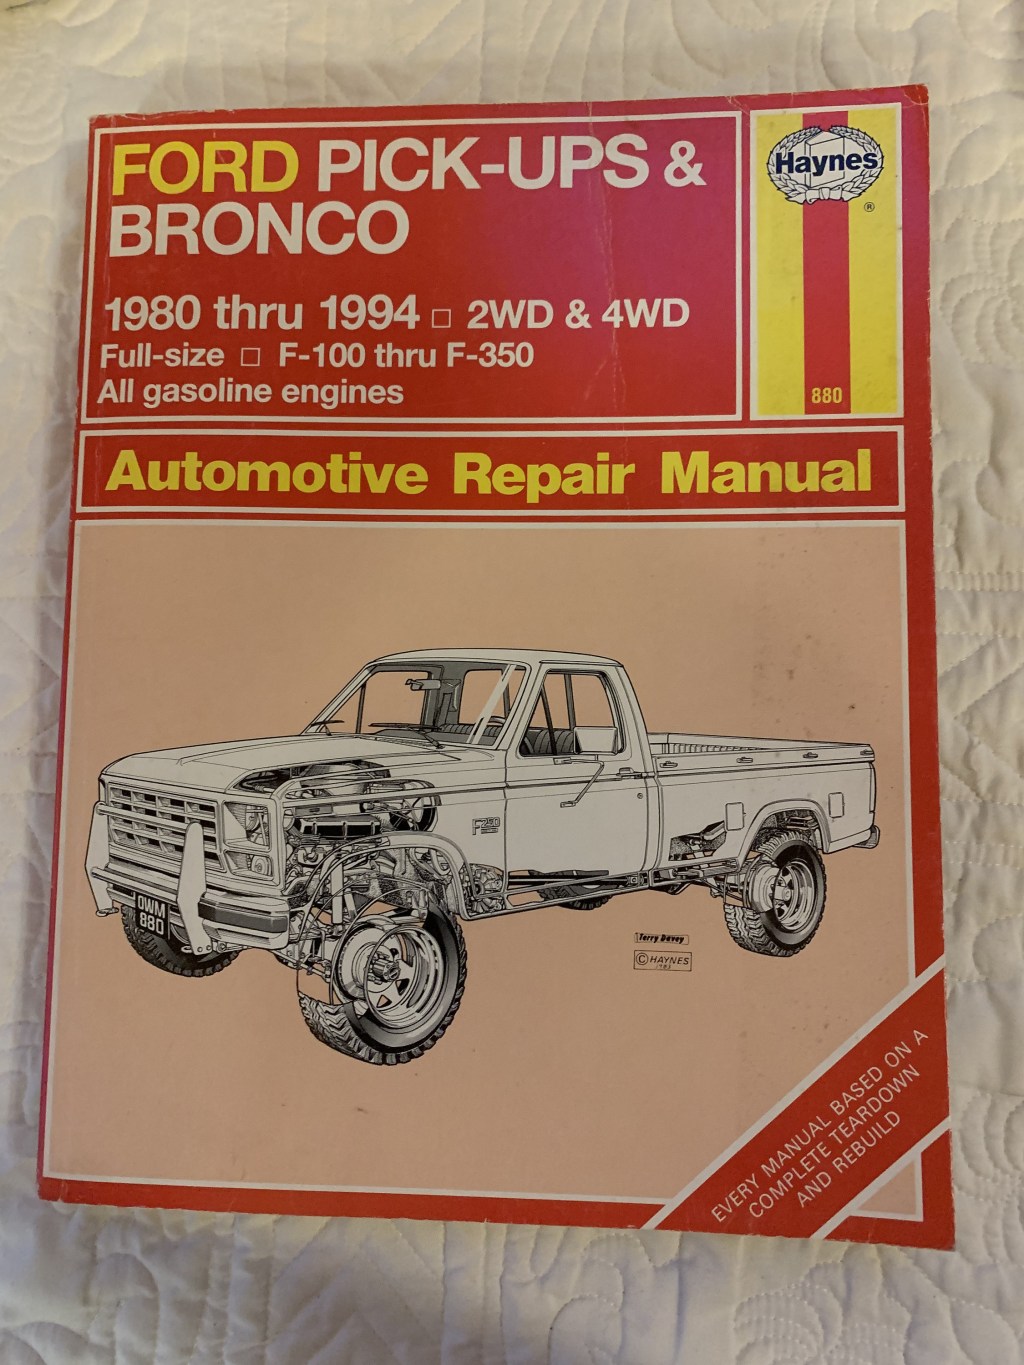 Picture of: Ford Pick-ups & Bronco Haynes Automotive Repair – Etsy